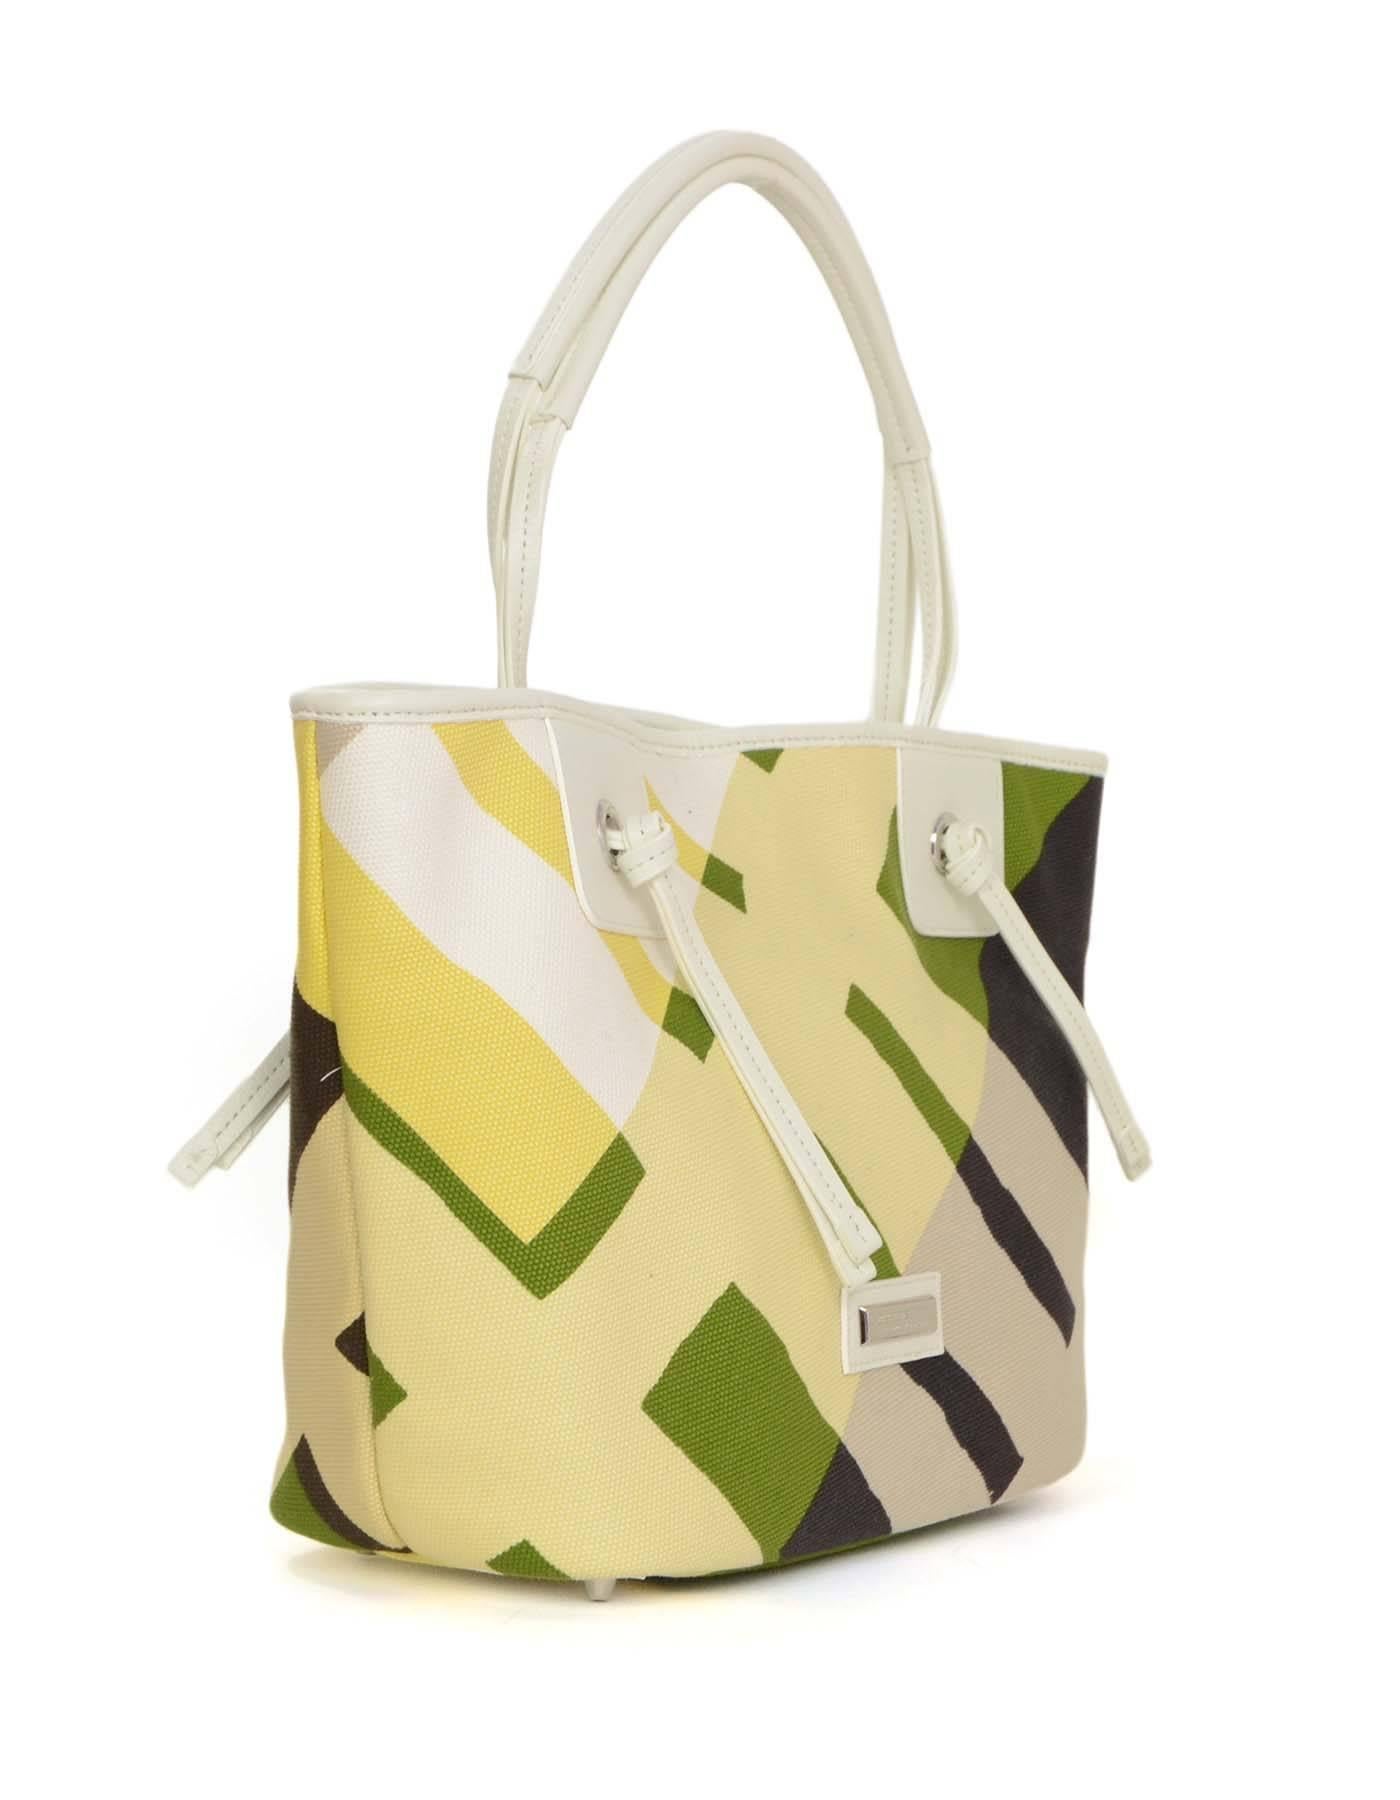 Burberry New Printed Canvas Tote Bag
Features multi-colored graphic print with Burberry logo hardware

Color: White, yellow, beige, purple and green
Hardware: Silvertone
Materials: Canvas and leather
Lining: None
Closure/opening: Open top